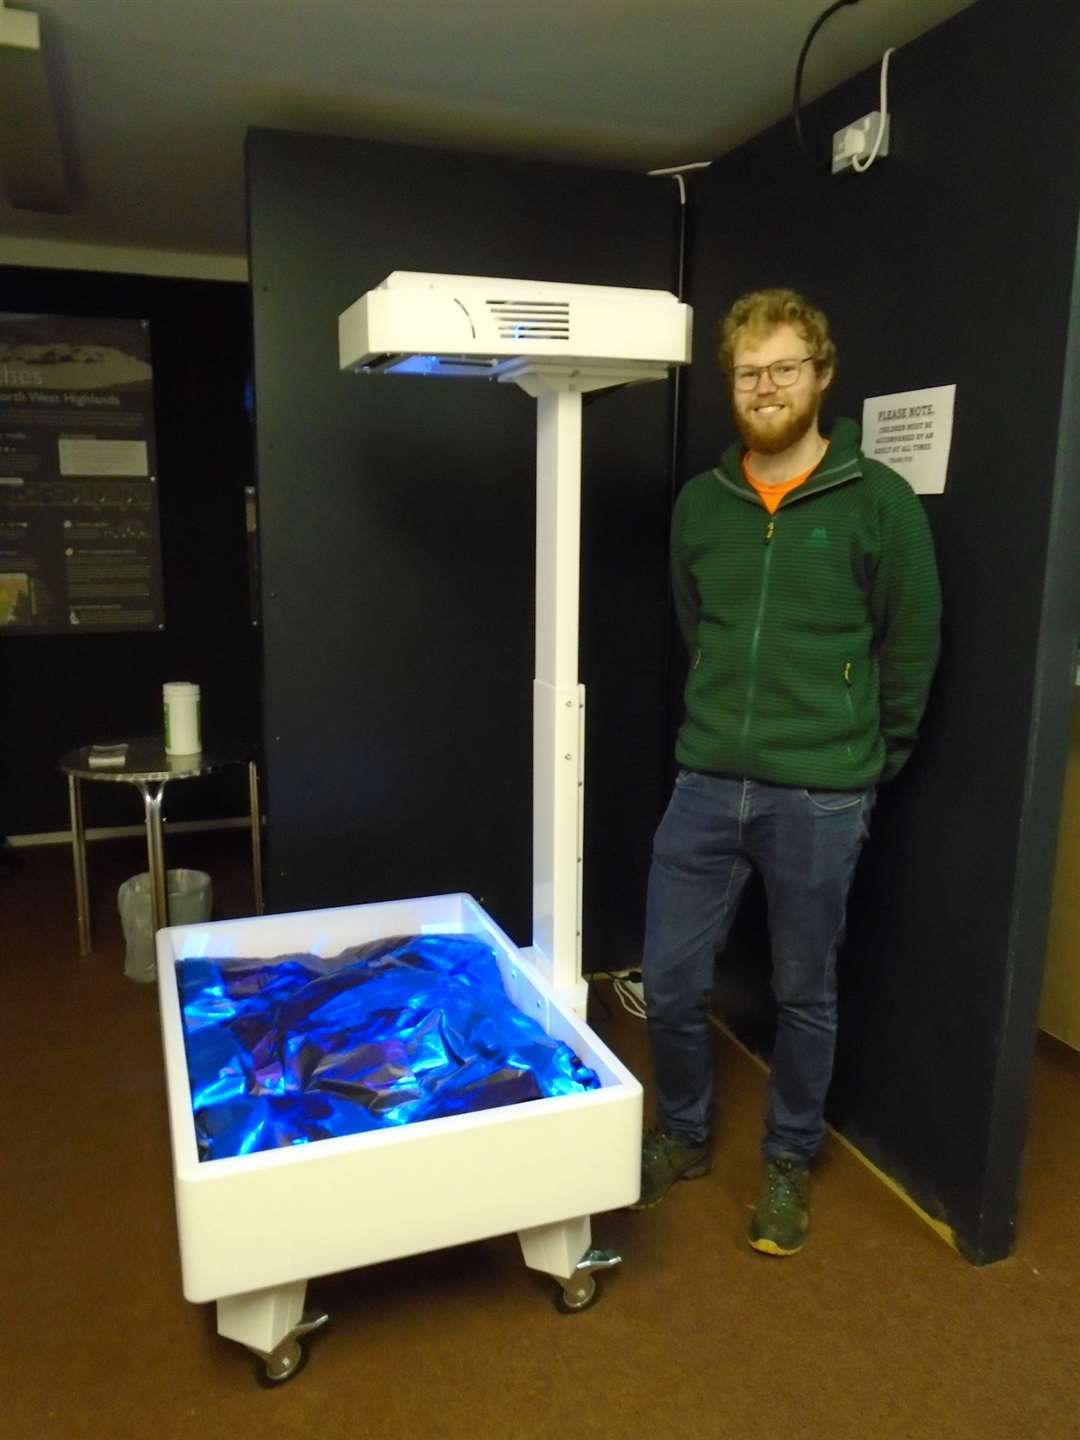 Andrew Whyte, the North West Highlands Geopark's newly appointed education and engagement officer, helped install the interactive sandbox at the Rock Stop.